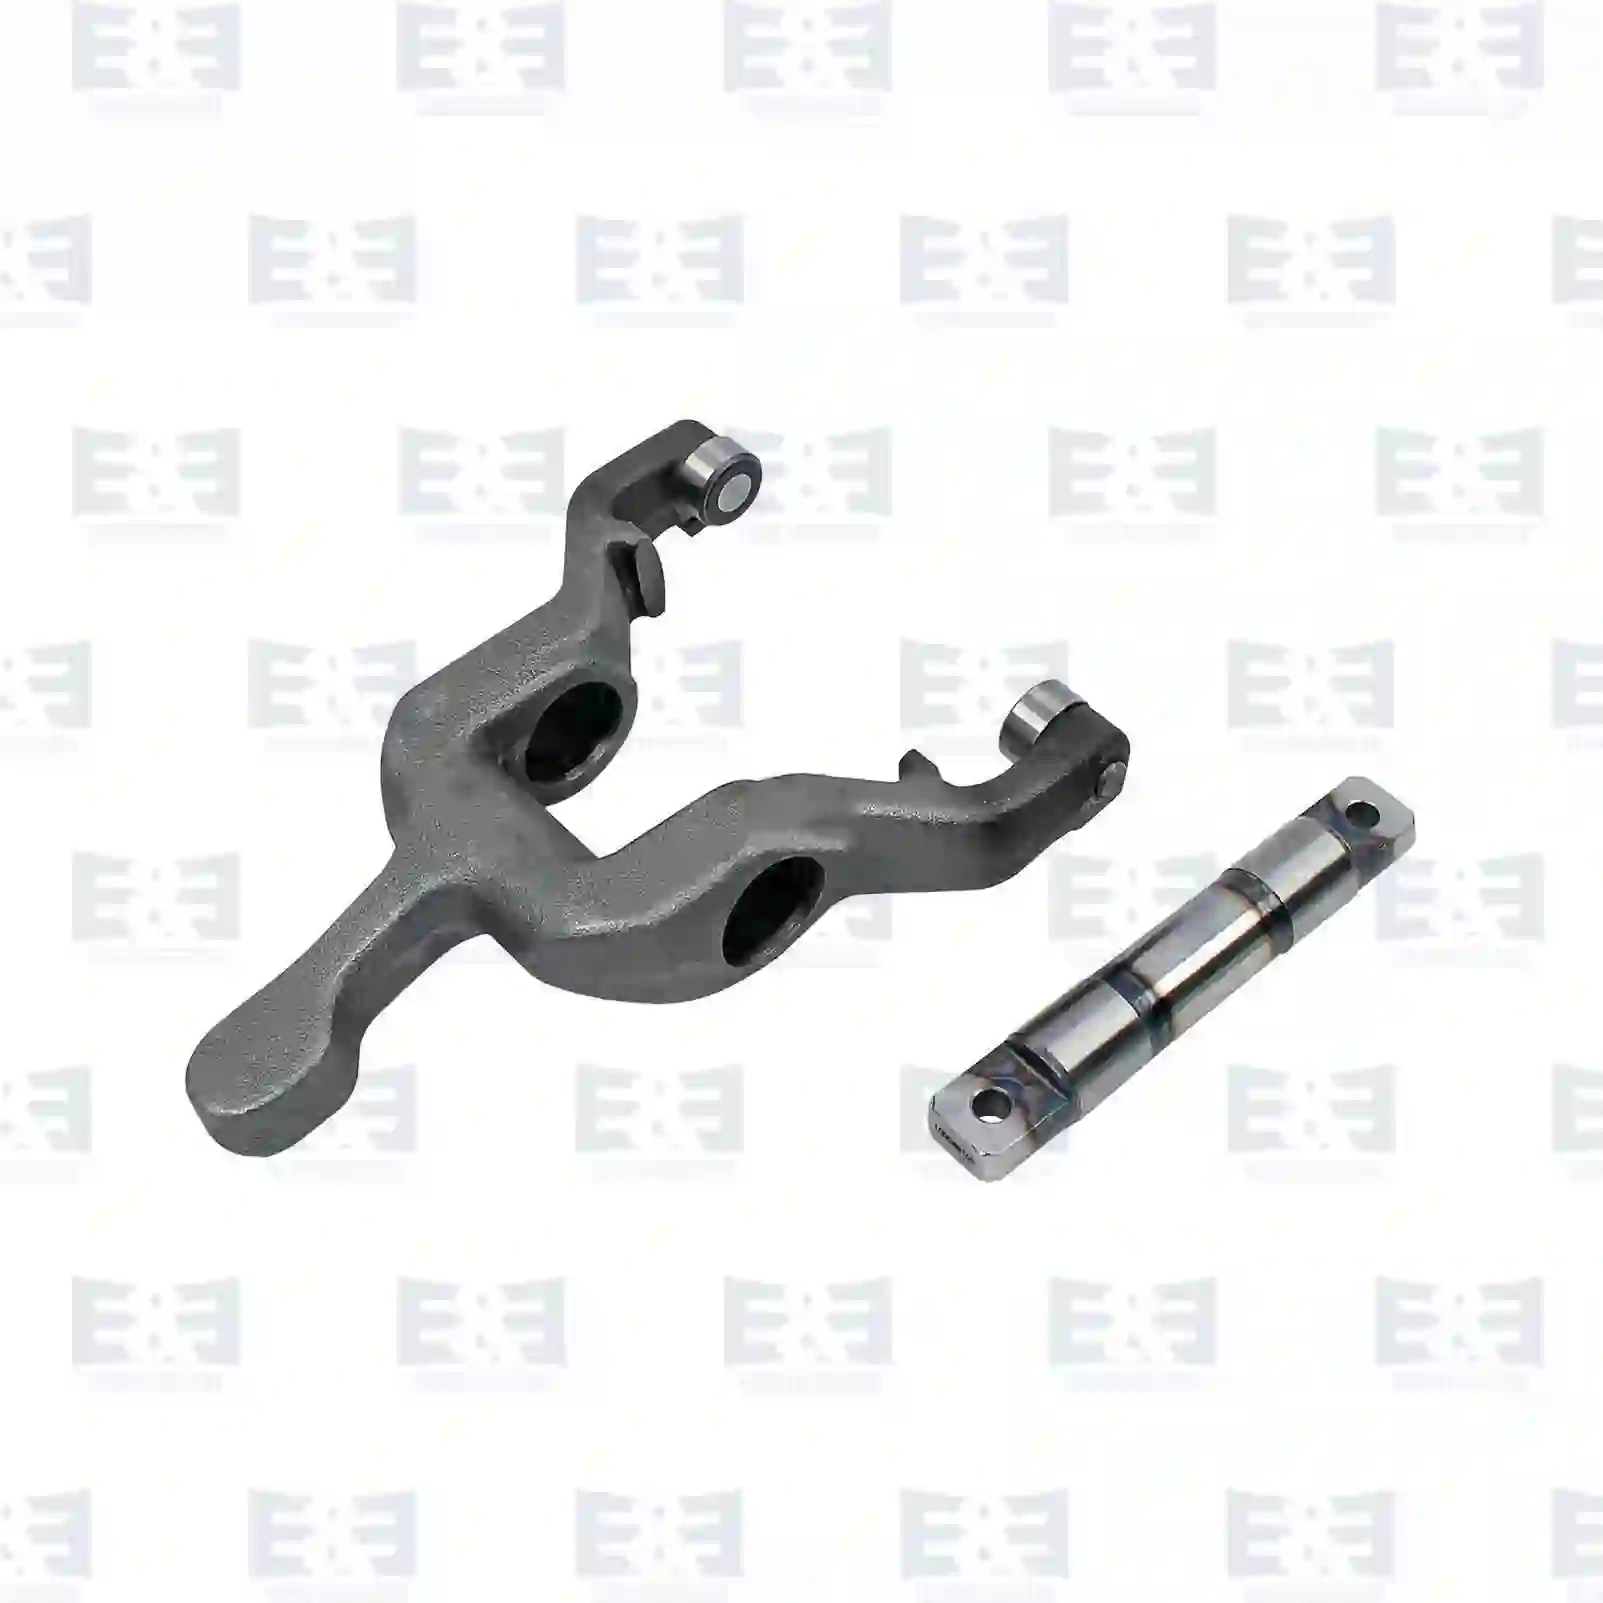  Release fork, with release shaft || E&E Truck Spare Parts | Truck Spare Parts, Auotomotive Spare Parts